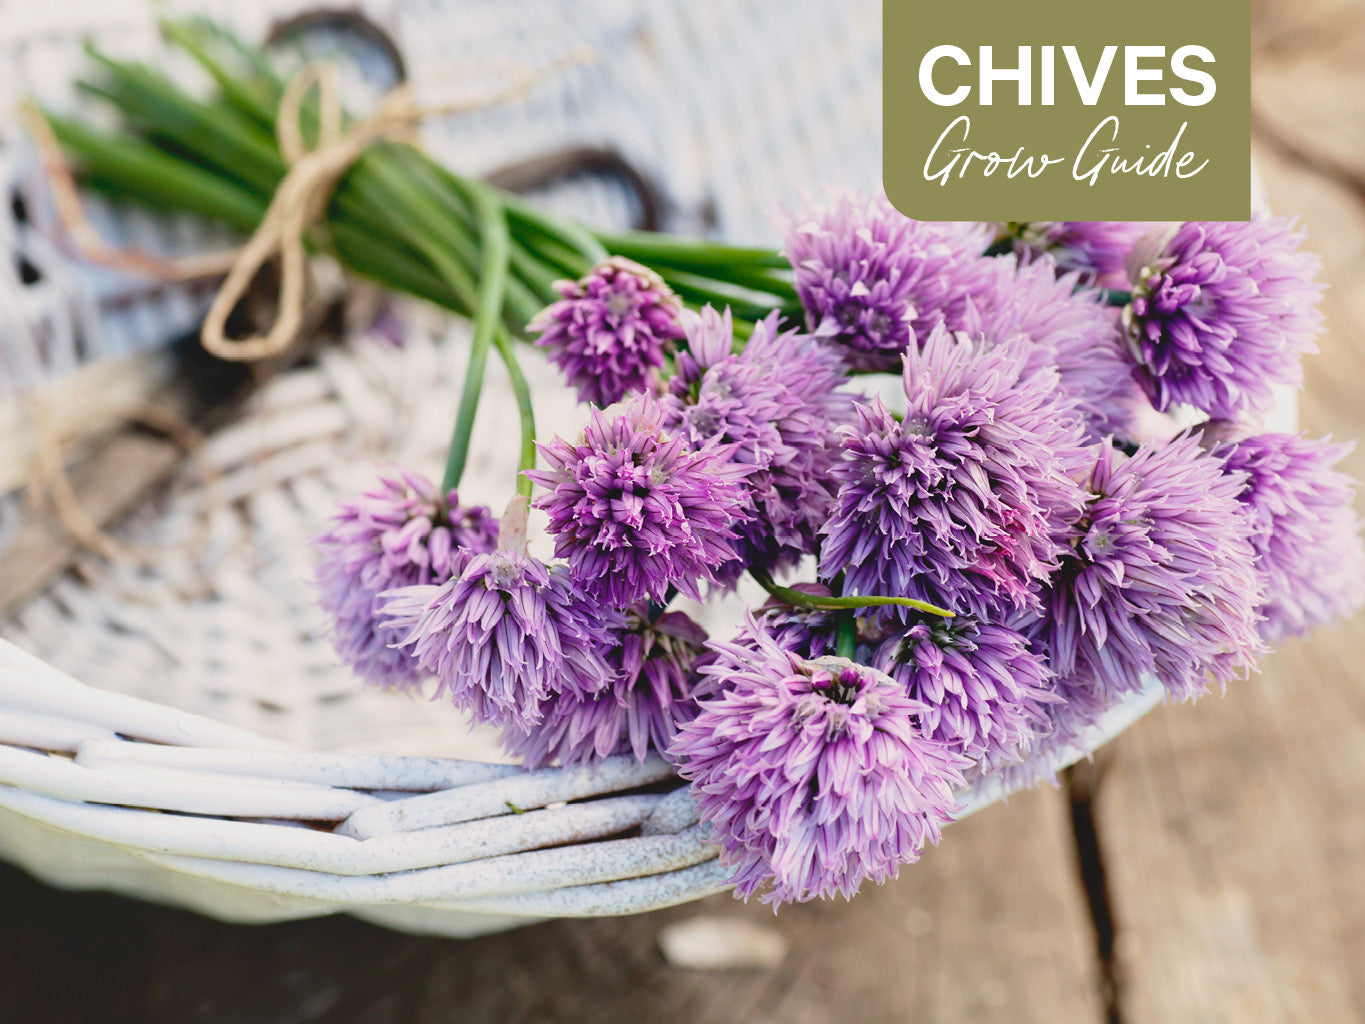 Chive Grow Guide: How to Plant, Grow and Harvest Chives